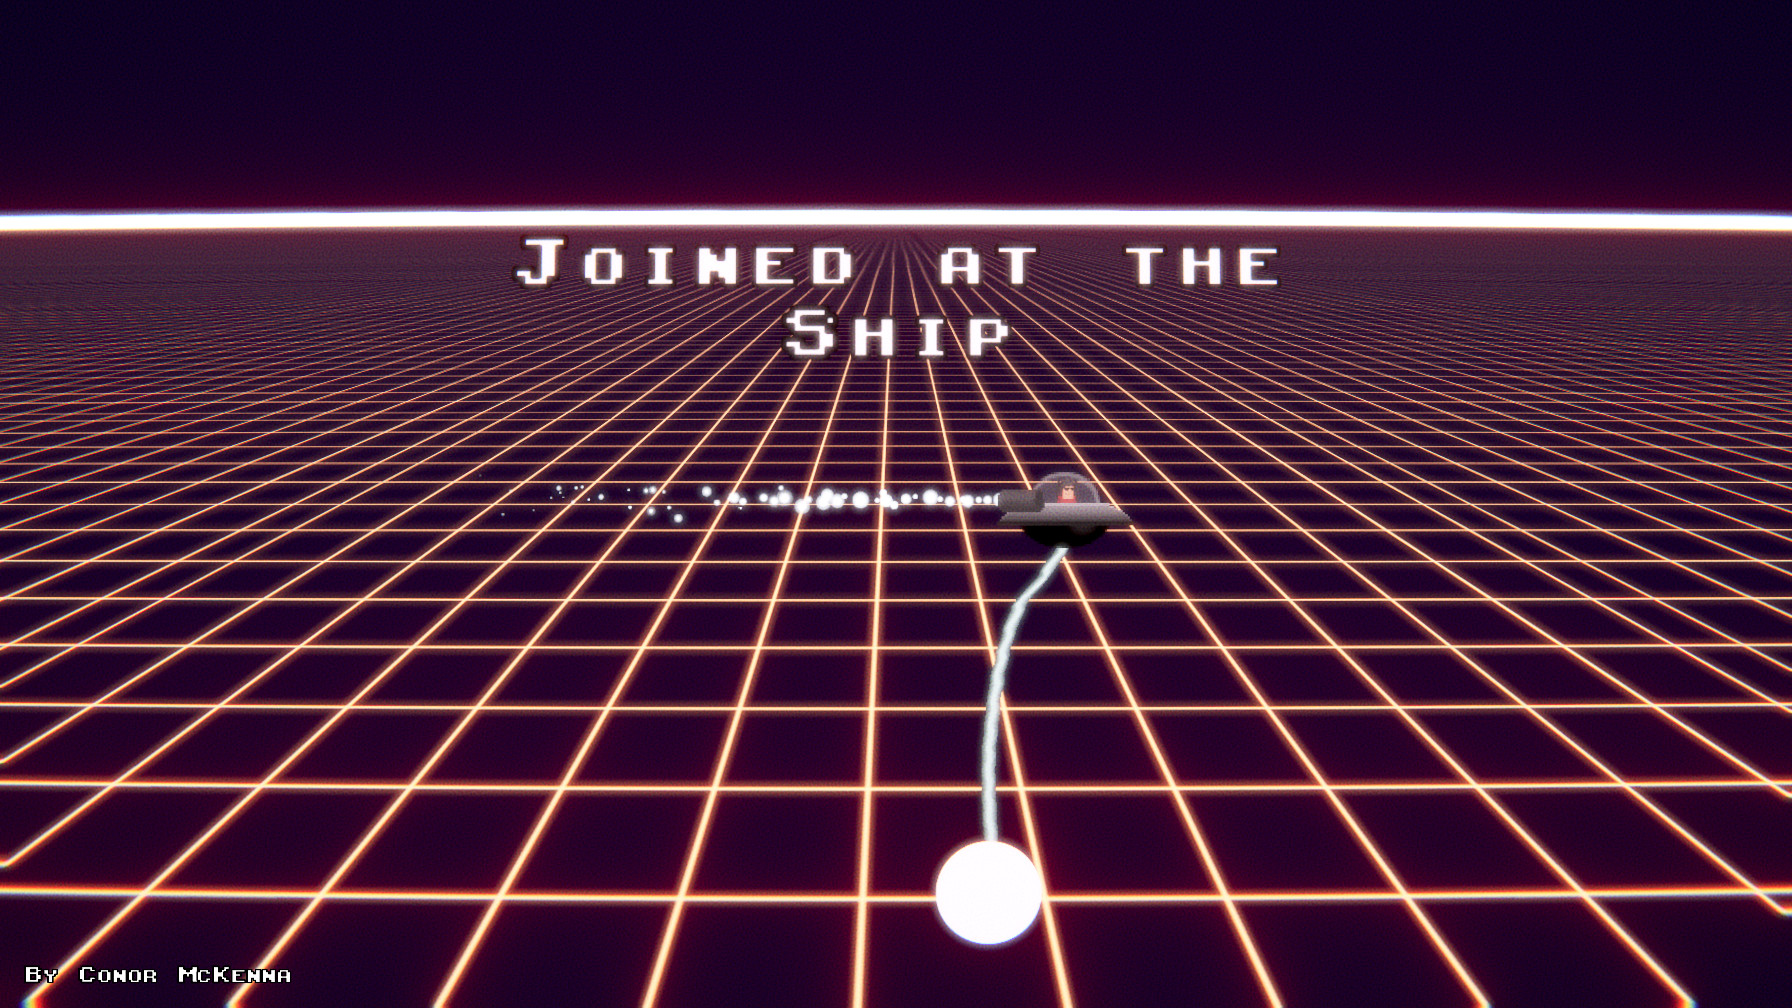 Joined at the Ship